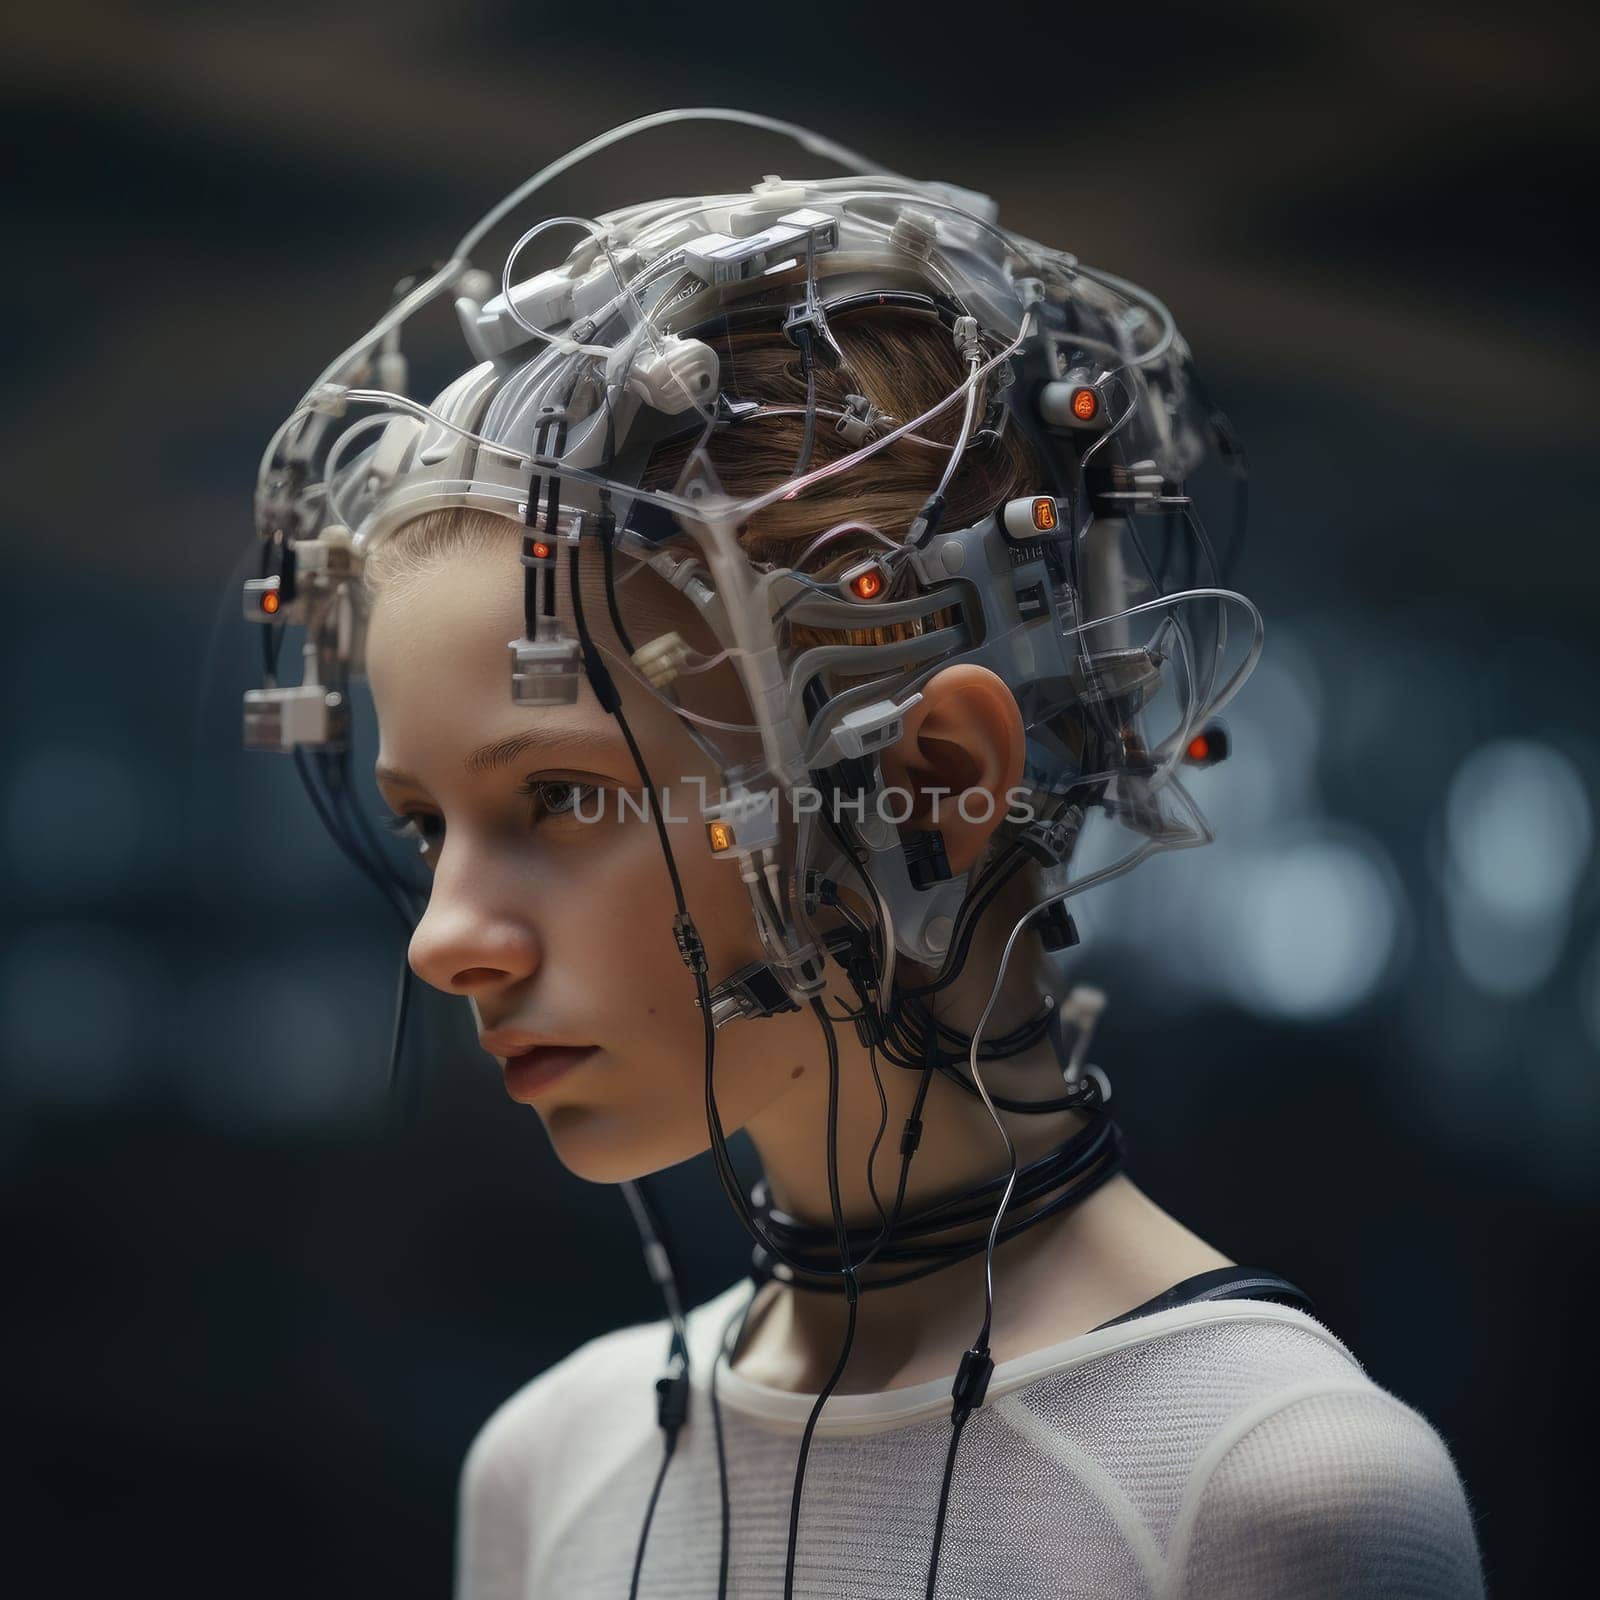 The wires are connected to the head of a young woman. Neural interface